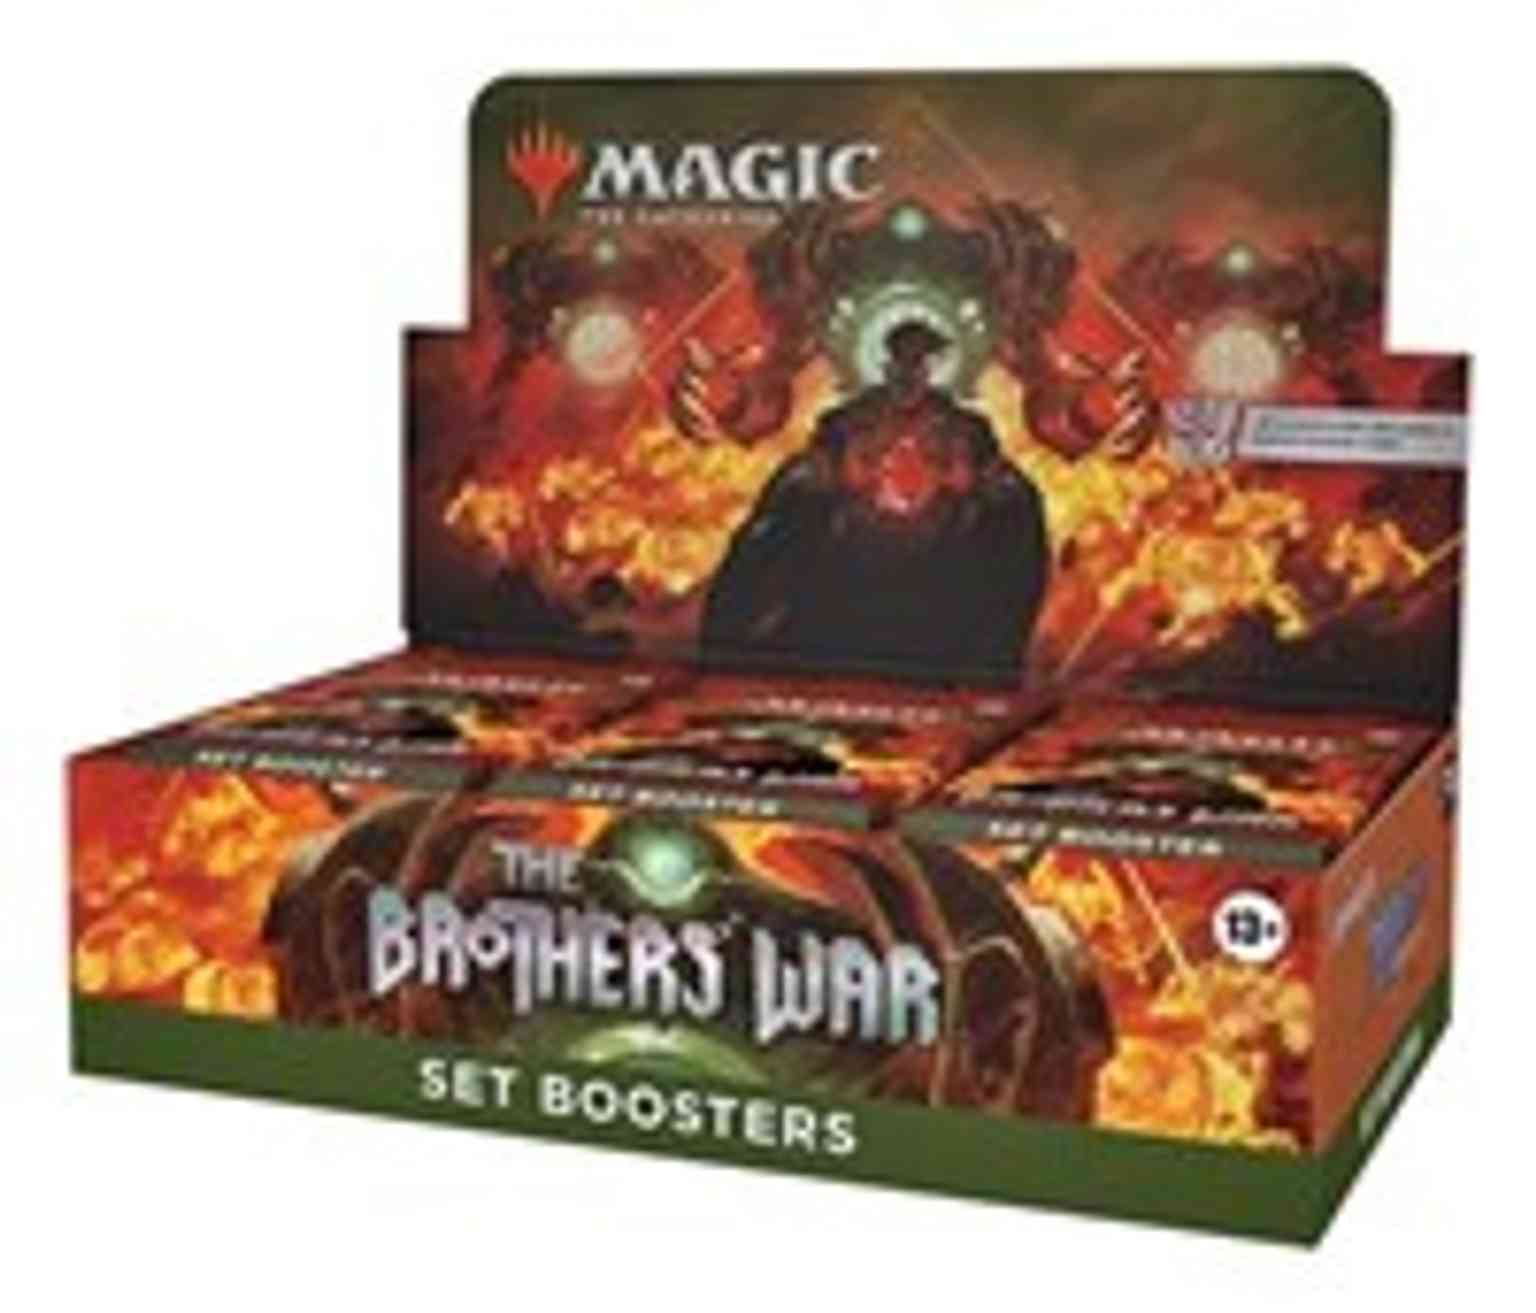 The Brothers' War - Set Booster Display magic card front